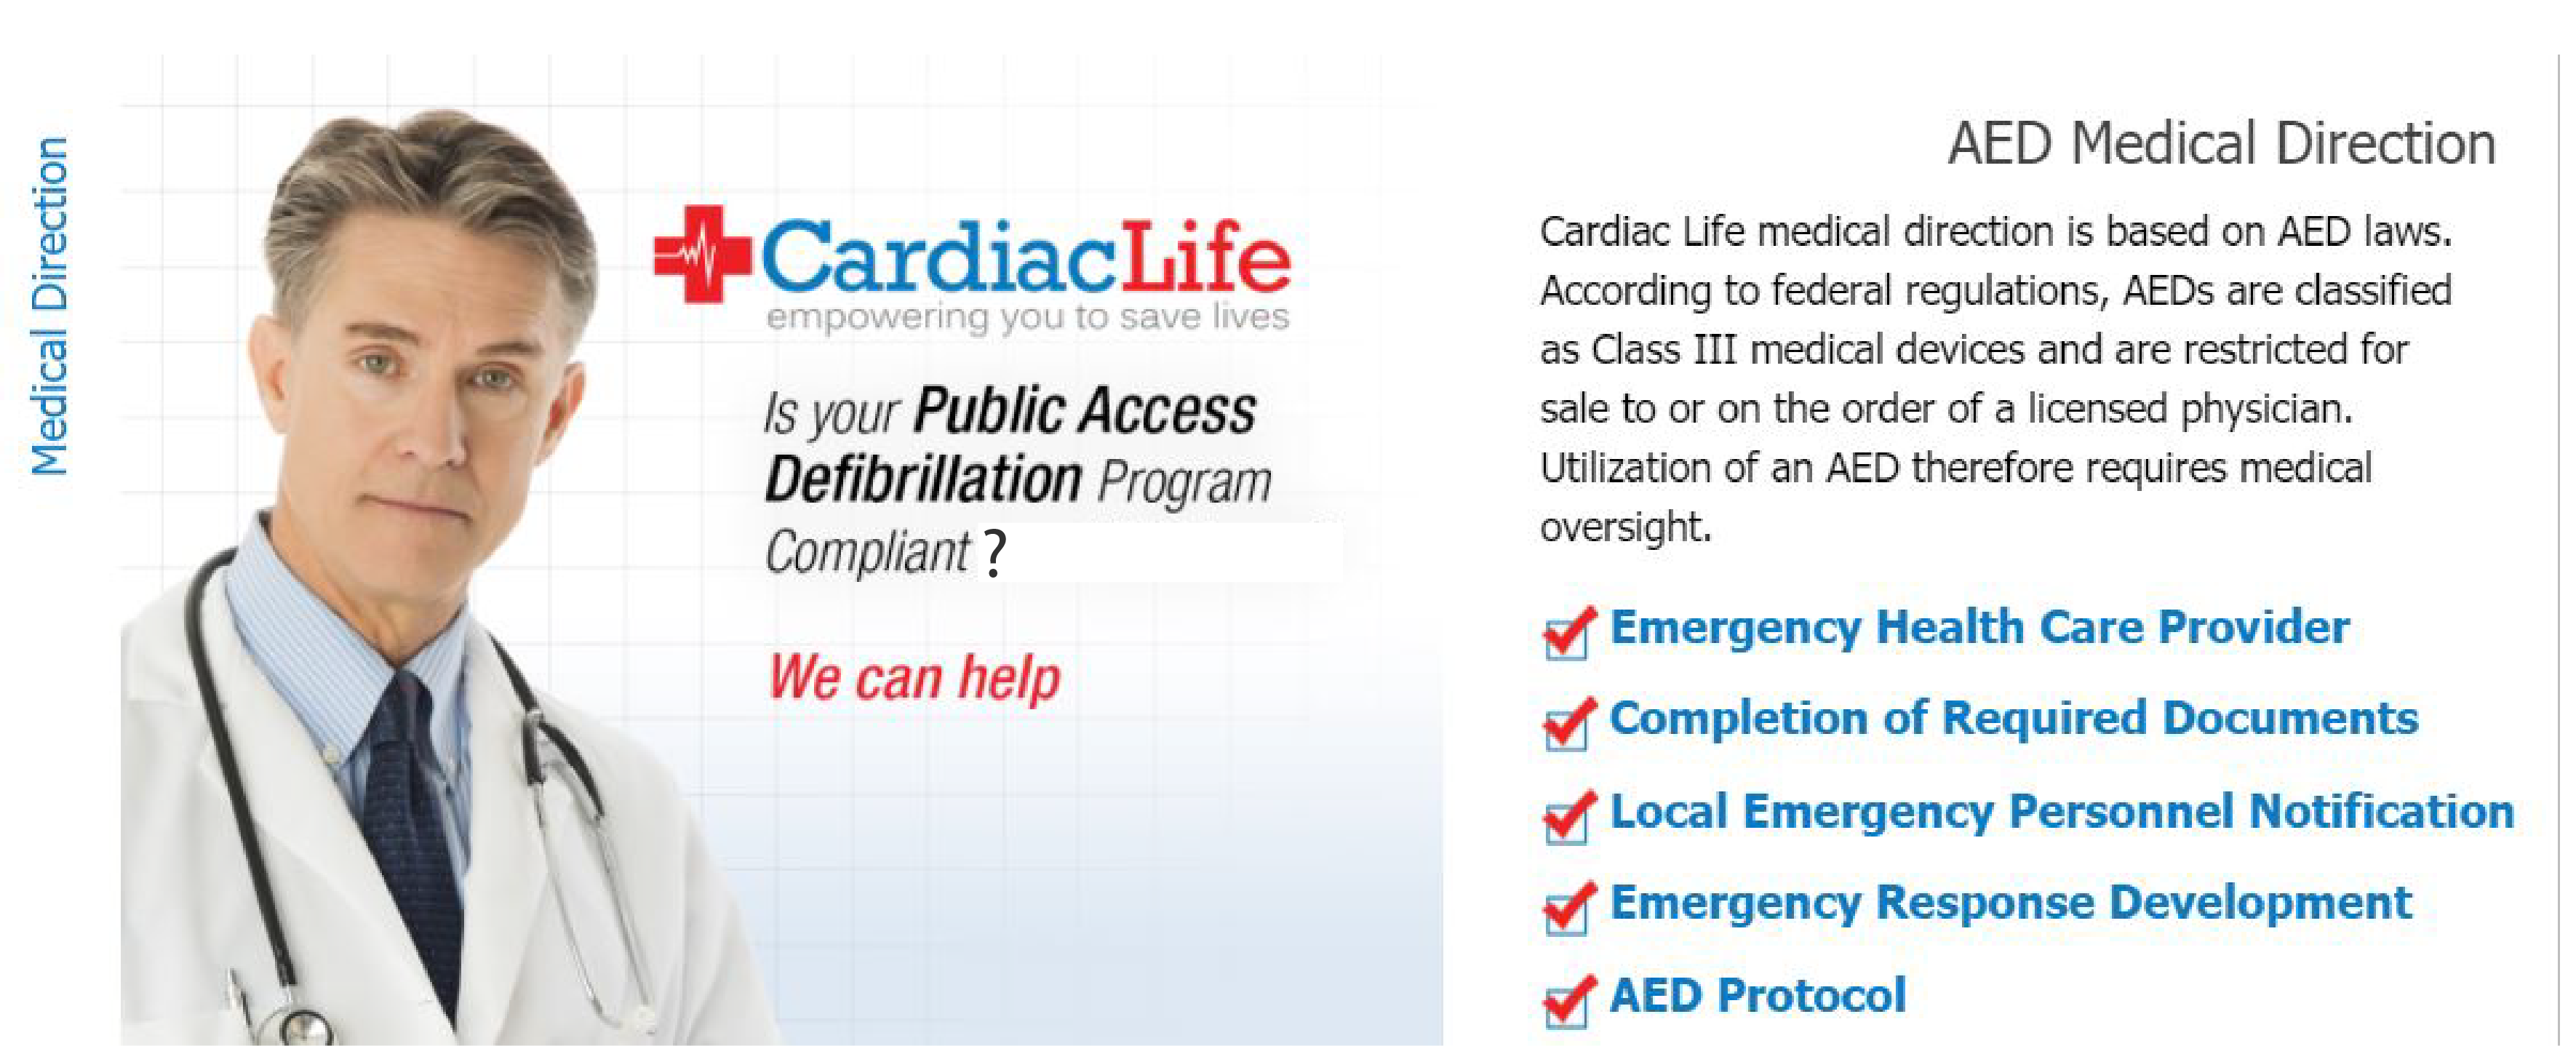 AED Medical Direction